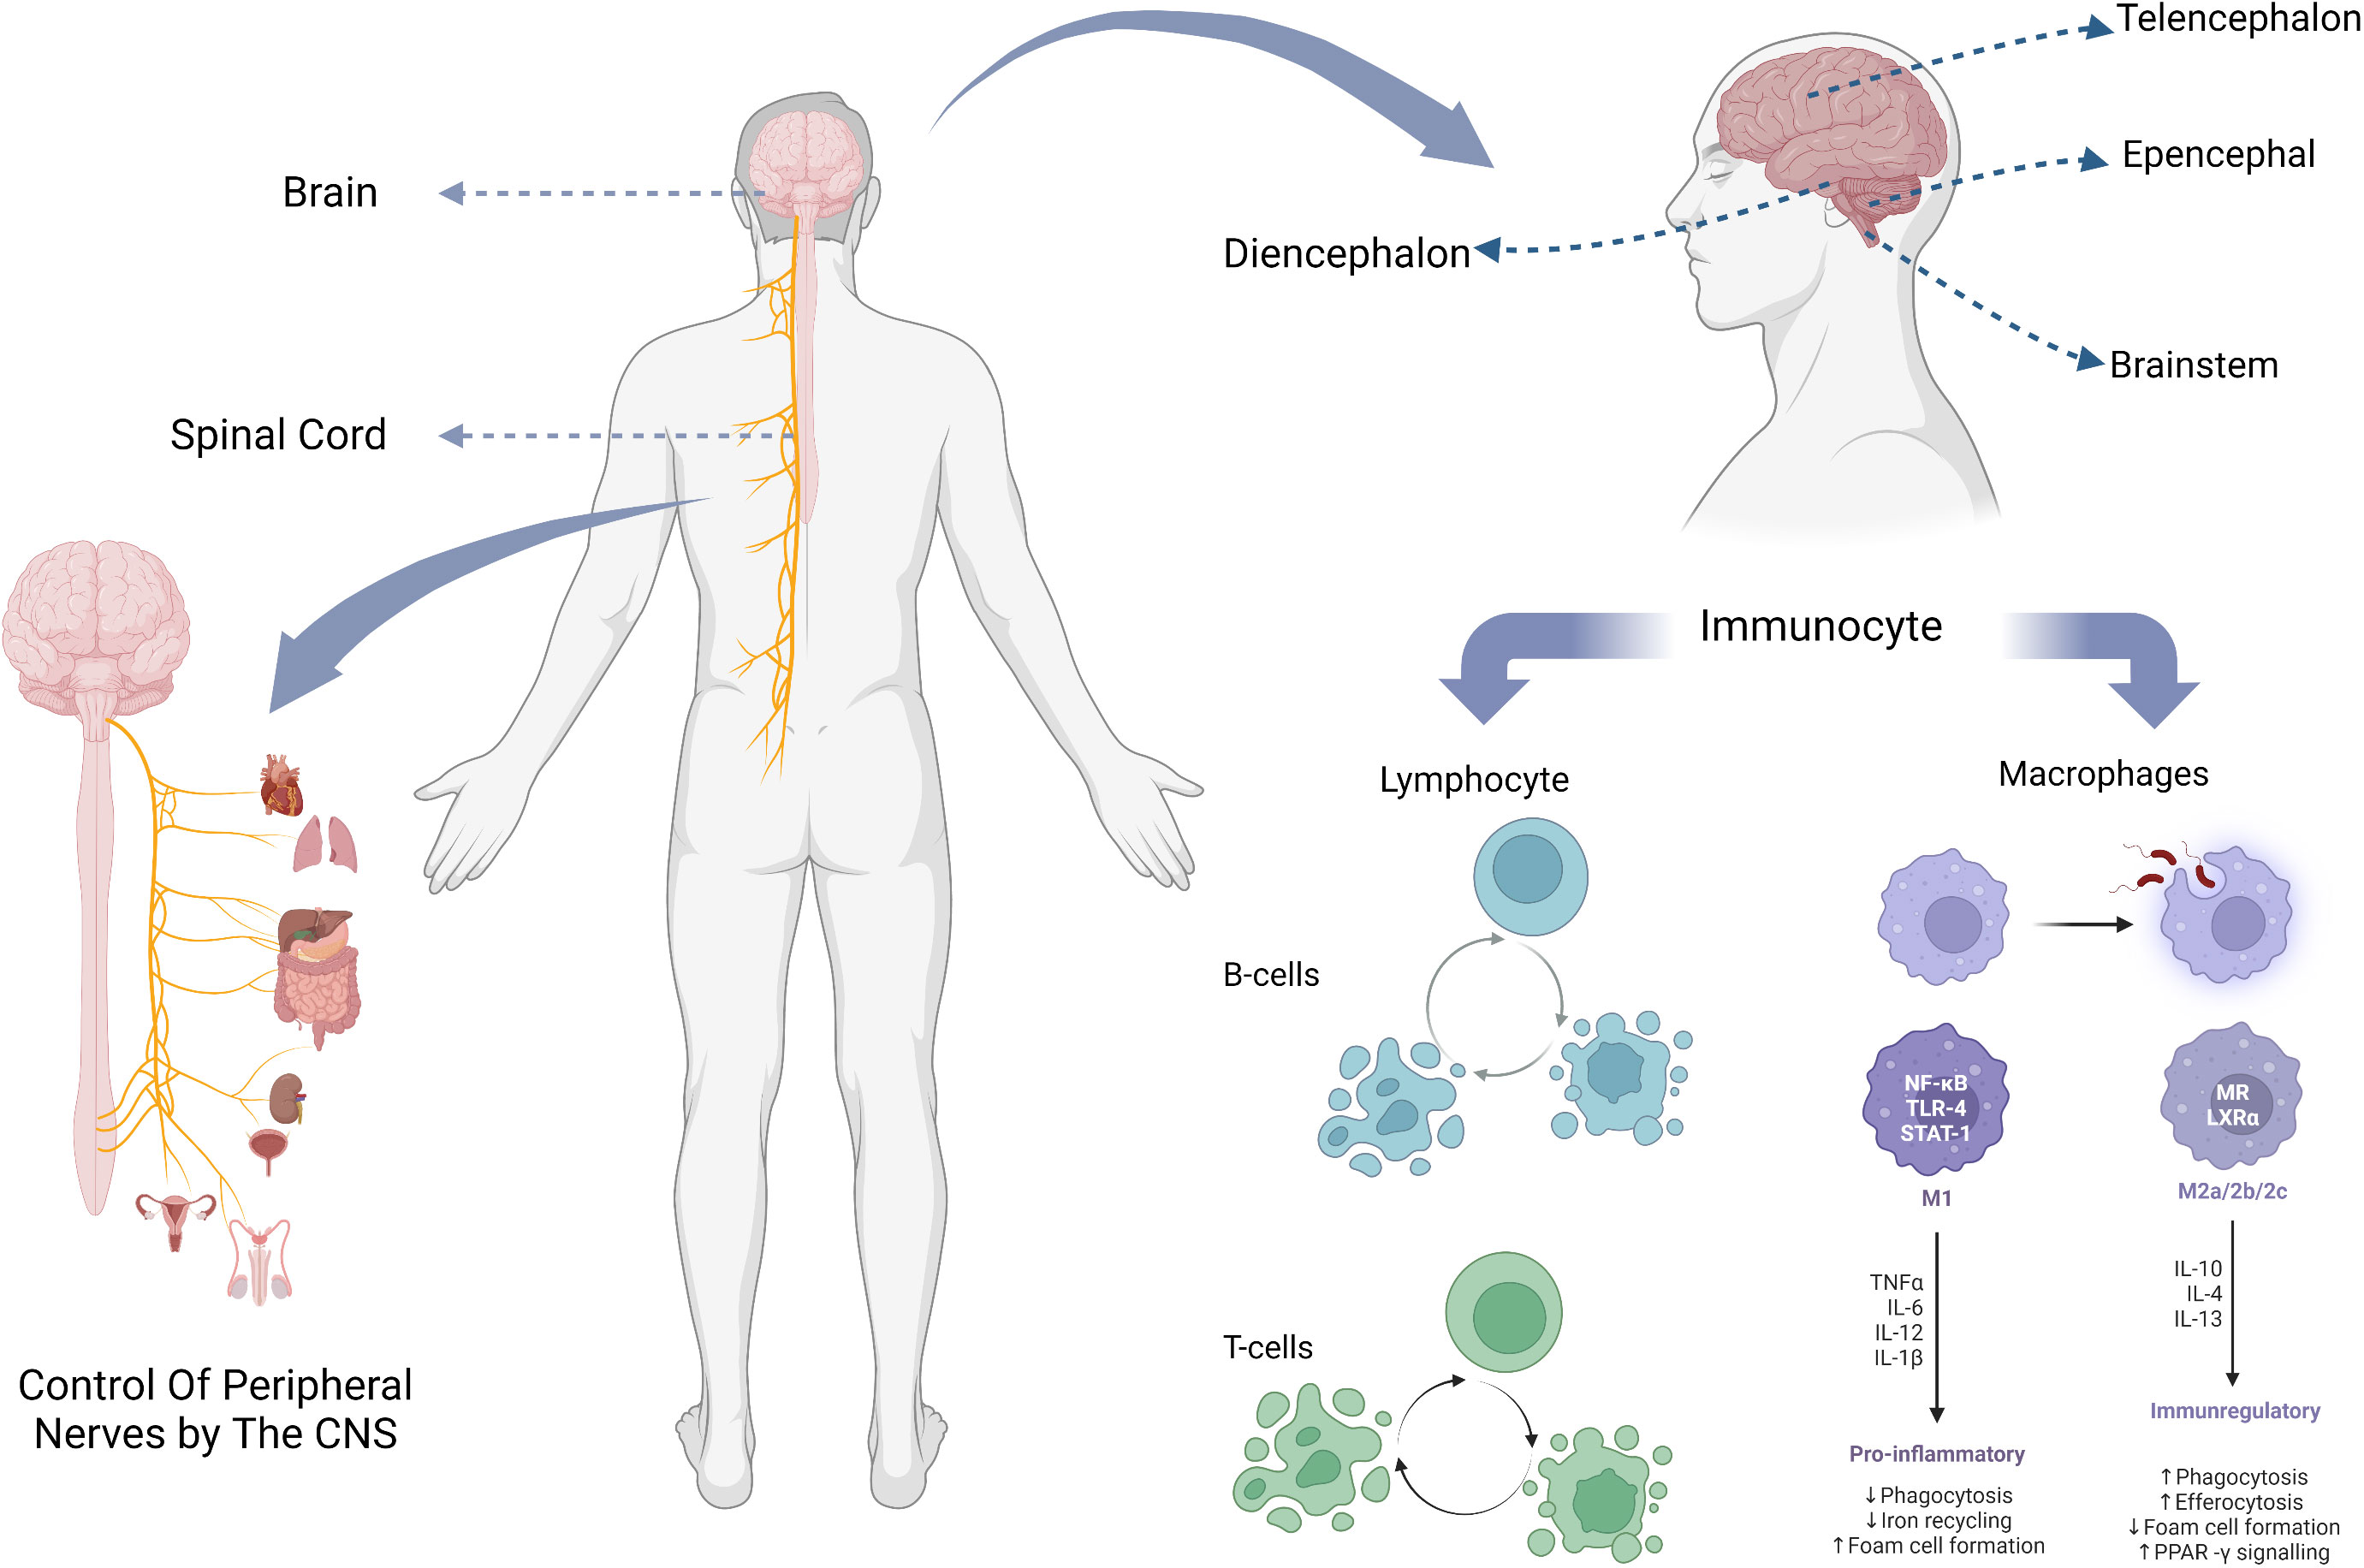 Frontiers | CNS and CNS diseases in relation to their immune system